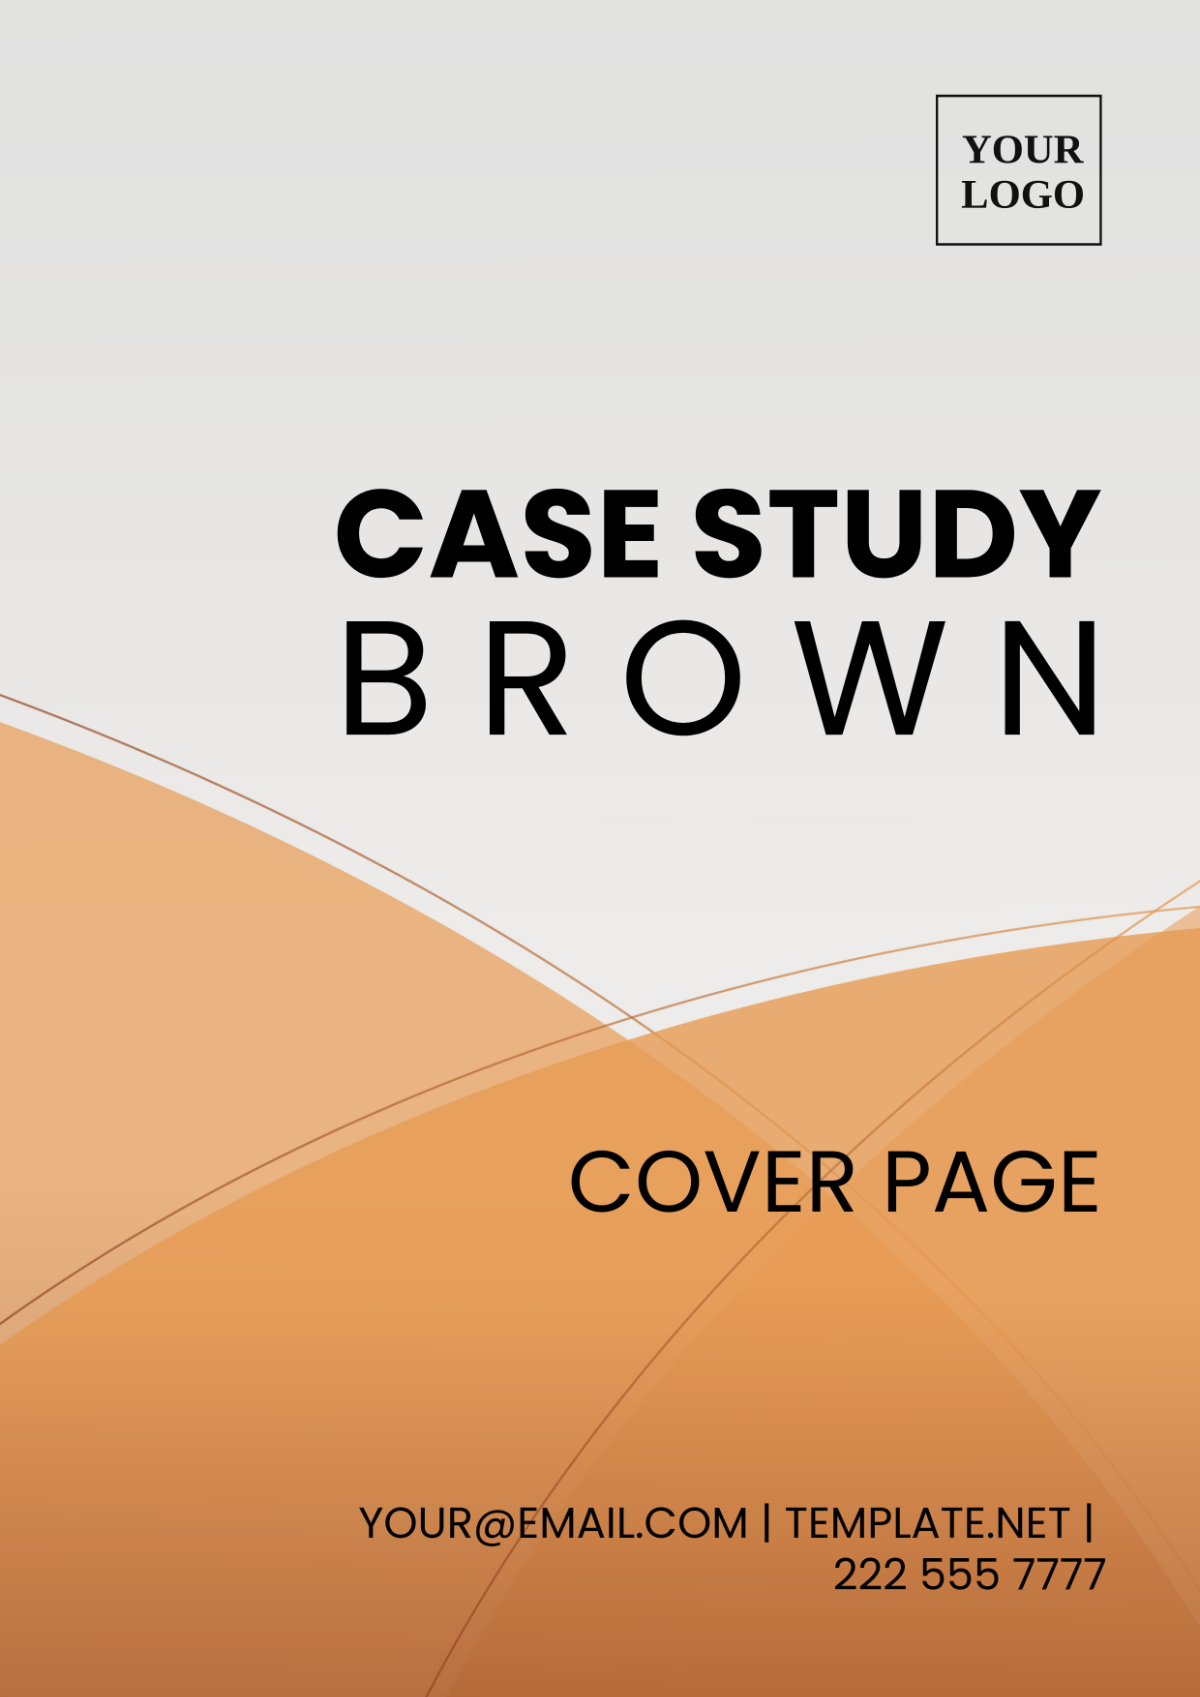 Case Study Brown Cover Page Template